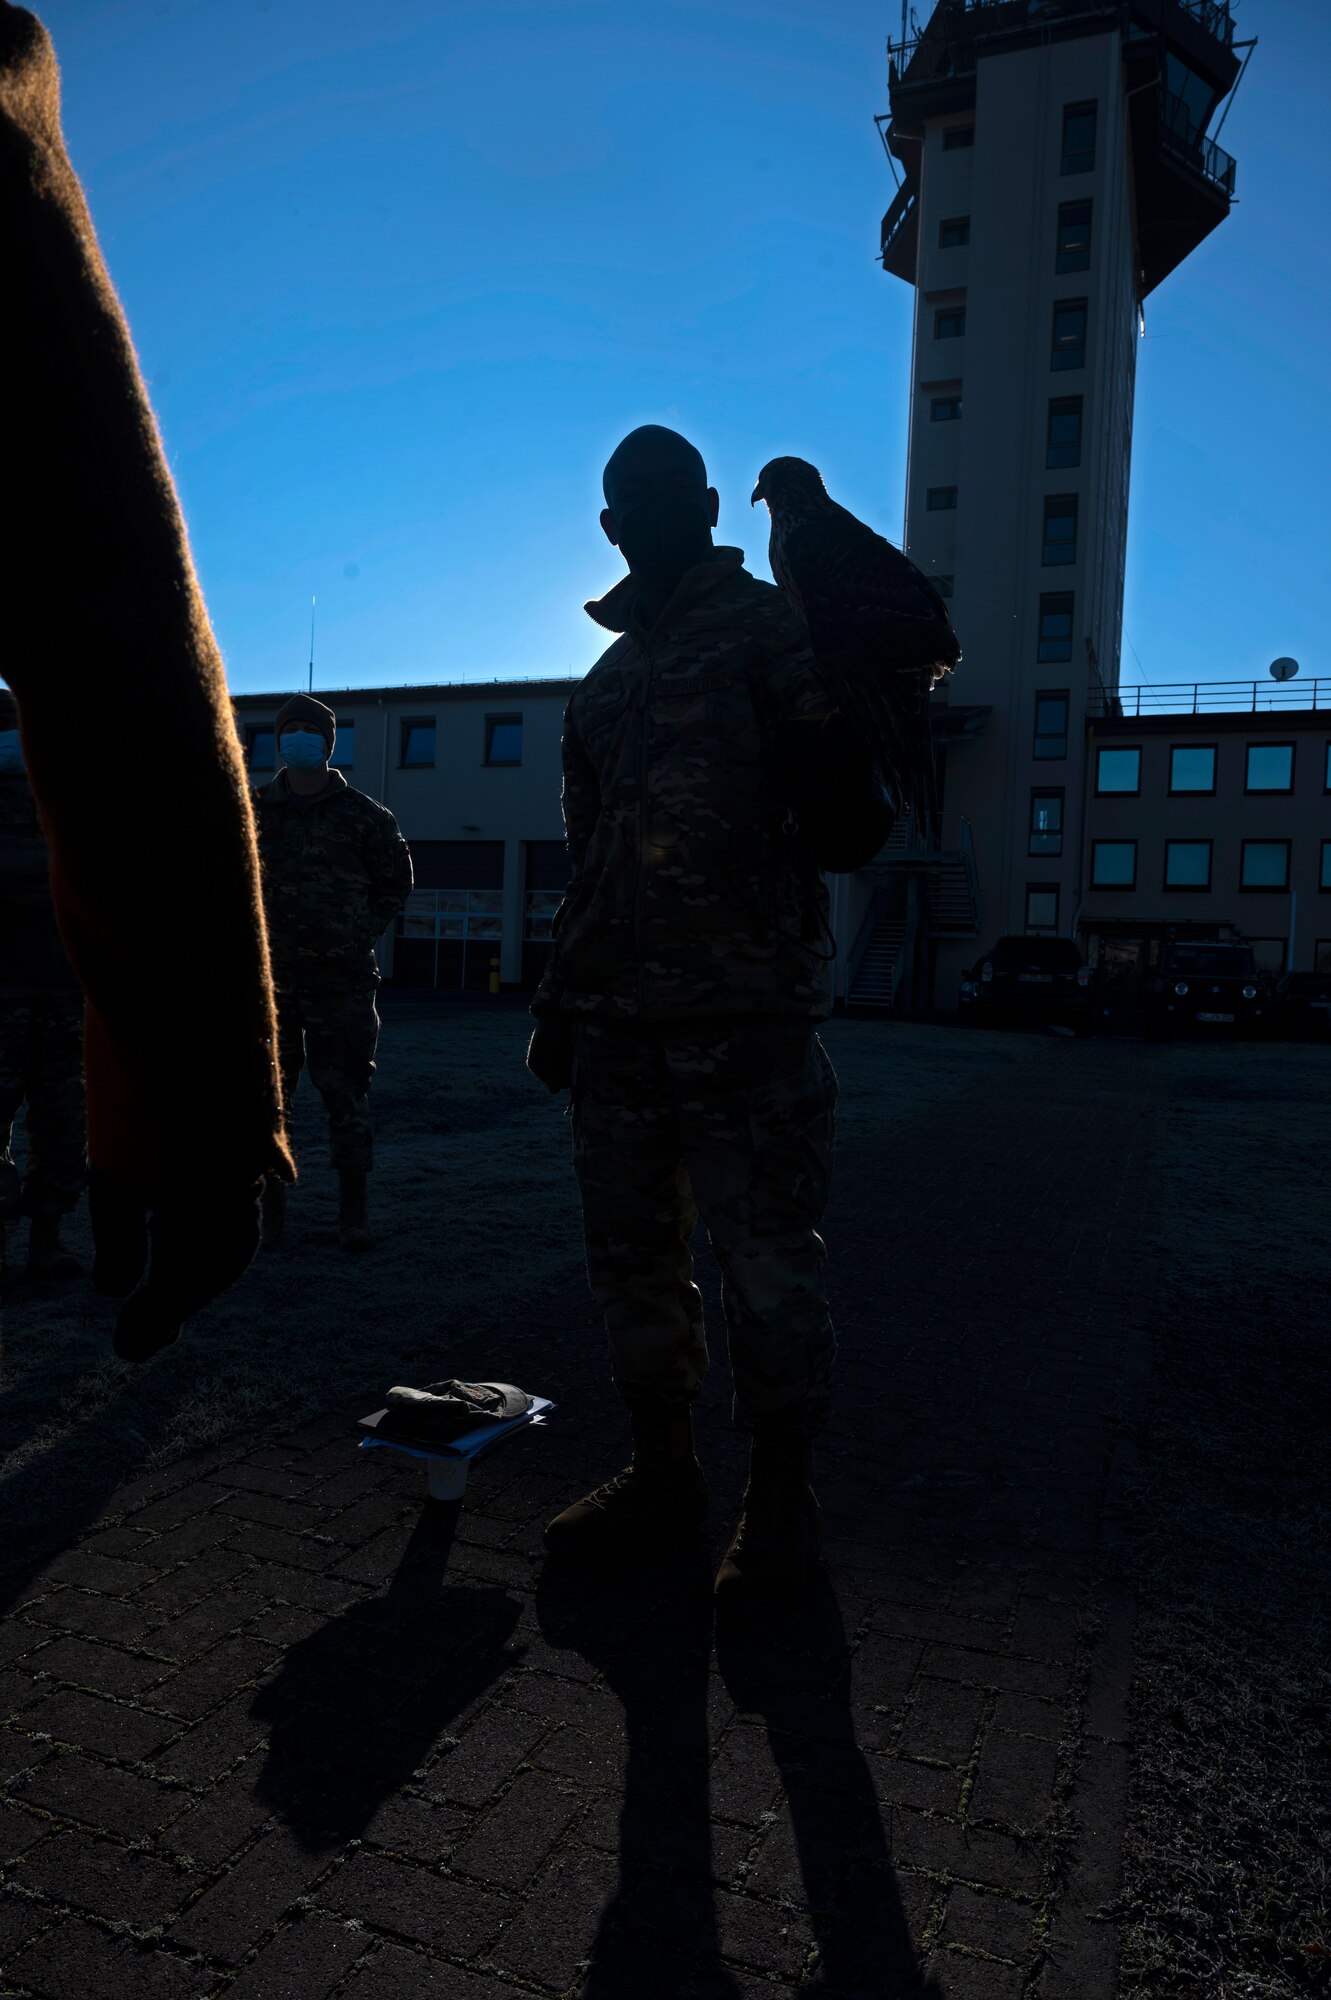 U.S. Air Force Col. Travolis Simmons, 3rd Wing commander, Joint Base Elmendorf-Richardson, Alaska, handles a hawk at Ramstein Air Base, Germany, Jan. 12, 2022. Simmons is an inspector for the 2022 Commander-in-Chief’s Installation Excellence Award and observed the Ramstein’s unique way of ensuring the local bird population does not cause damage to Aircraft by using birds of prey to keep other fowl away from the flight line. (U.S. Air Force photo by Senior Airman Thomas Karol)